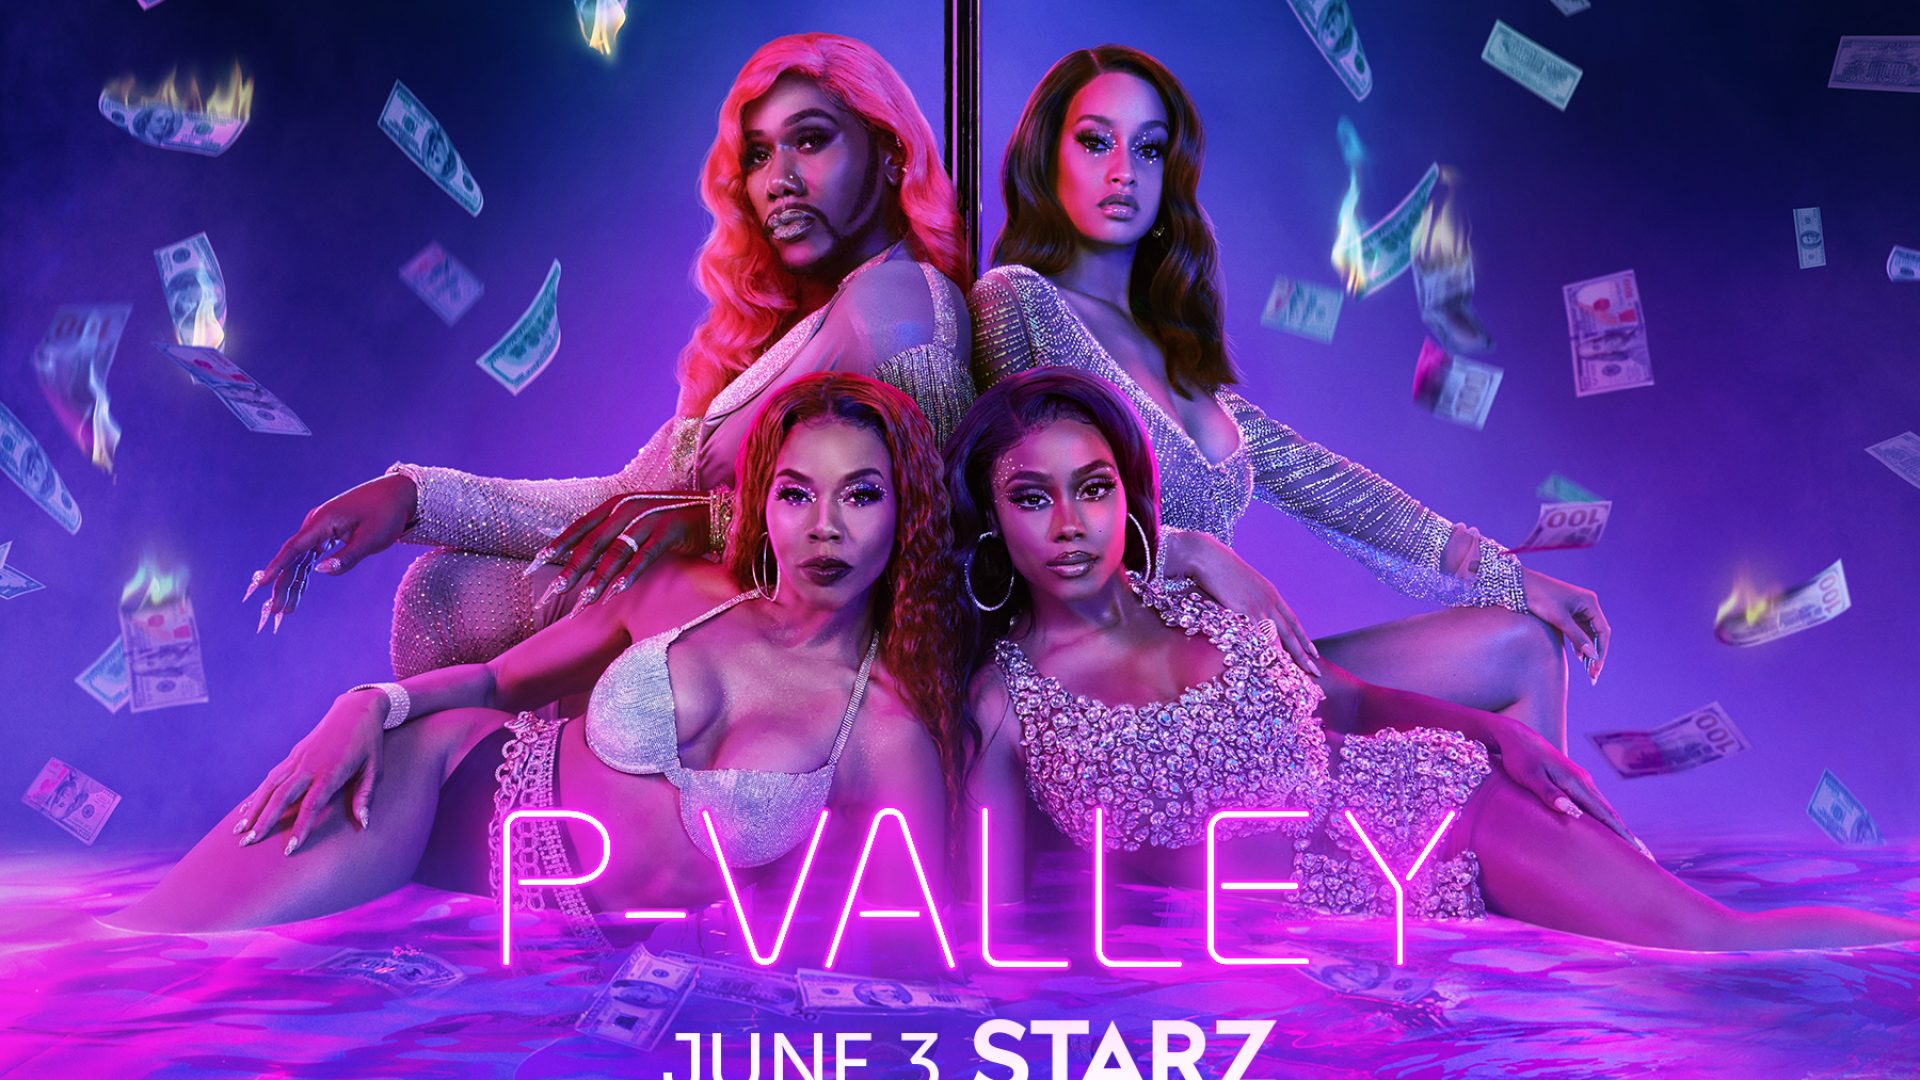 EXCLUSIVE: The Pynk Bounces Back In 'P-Valley' Season 2 Trailer